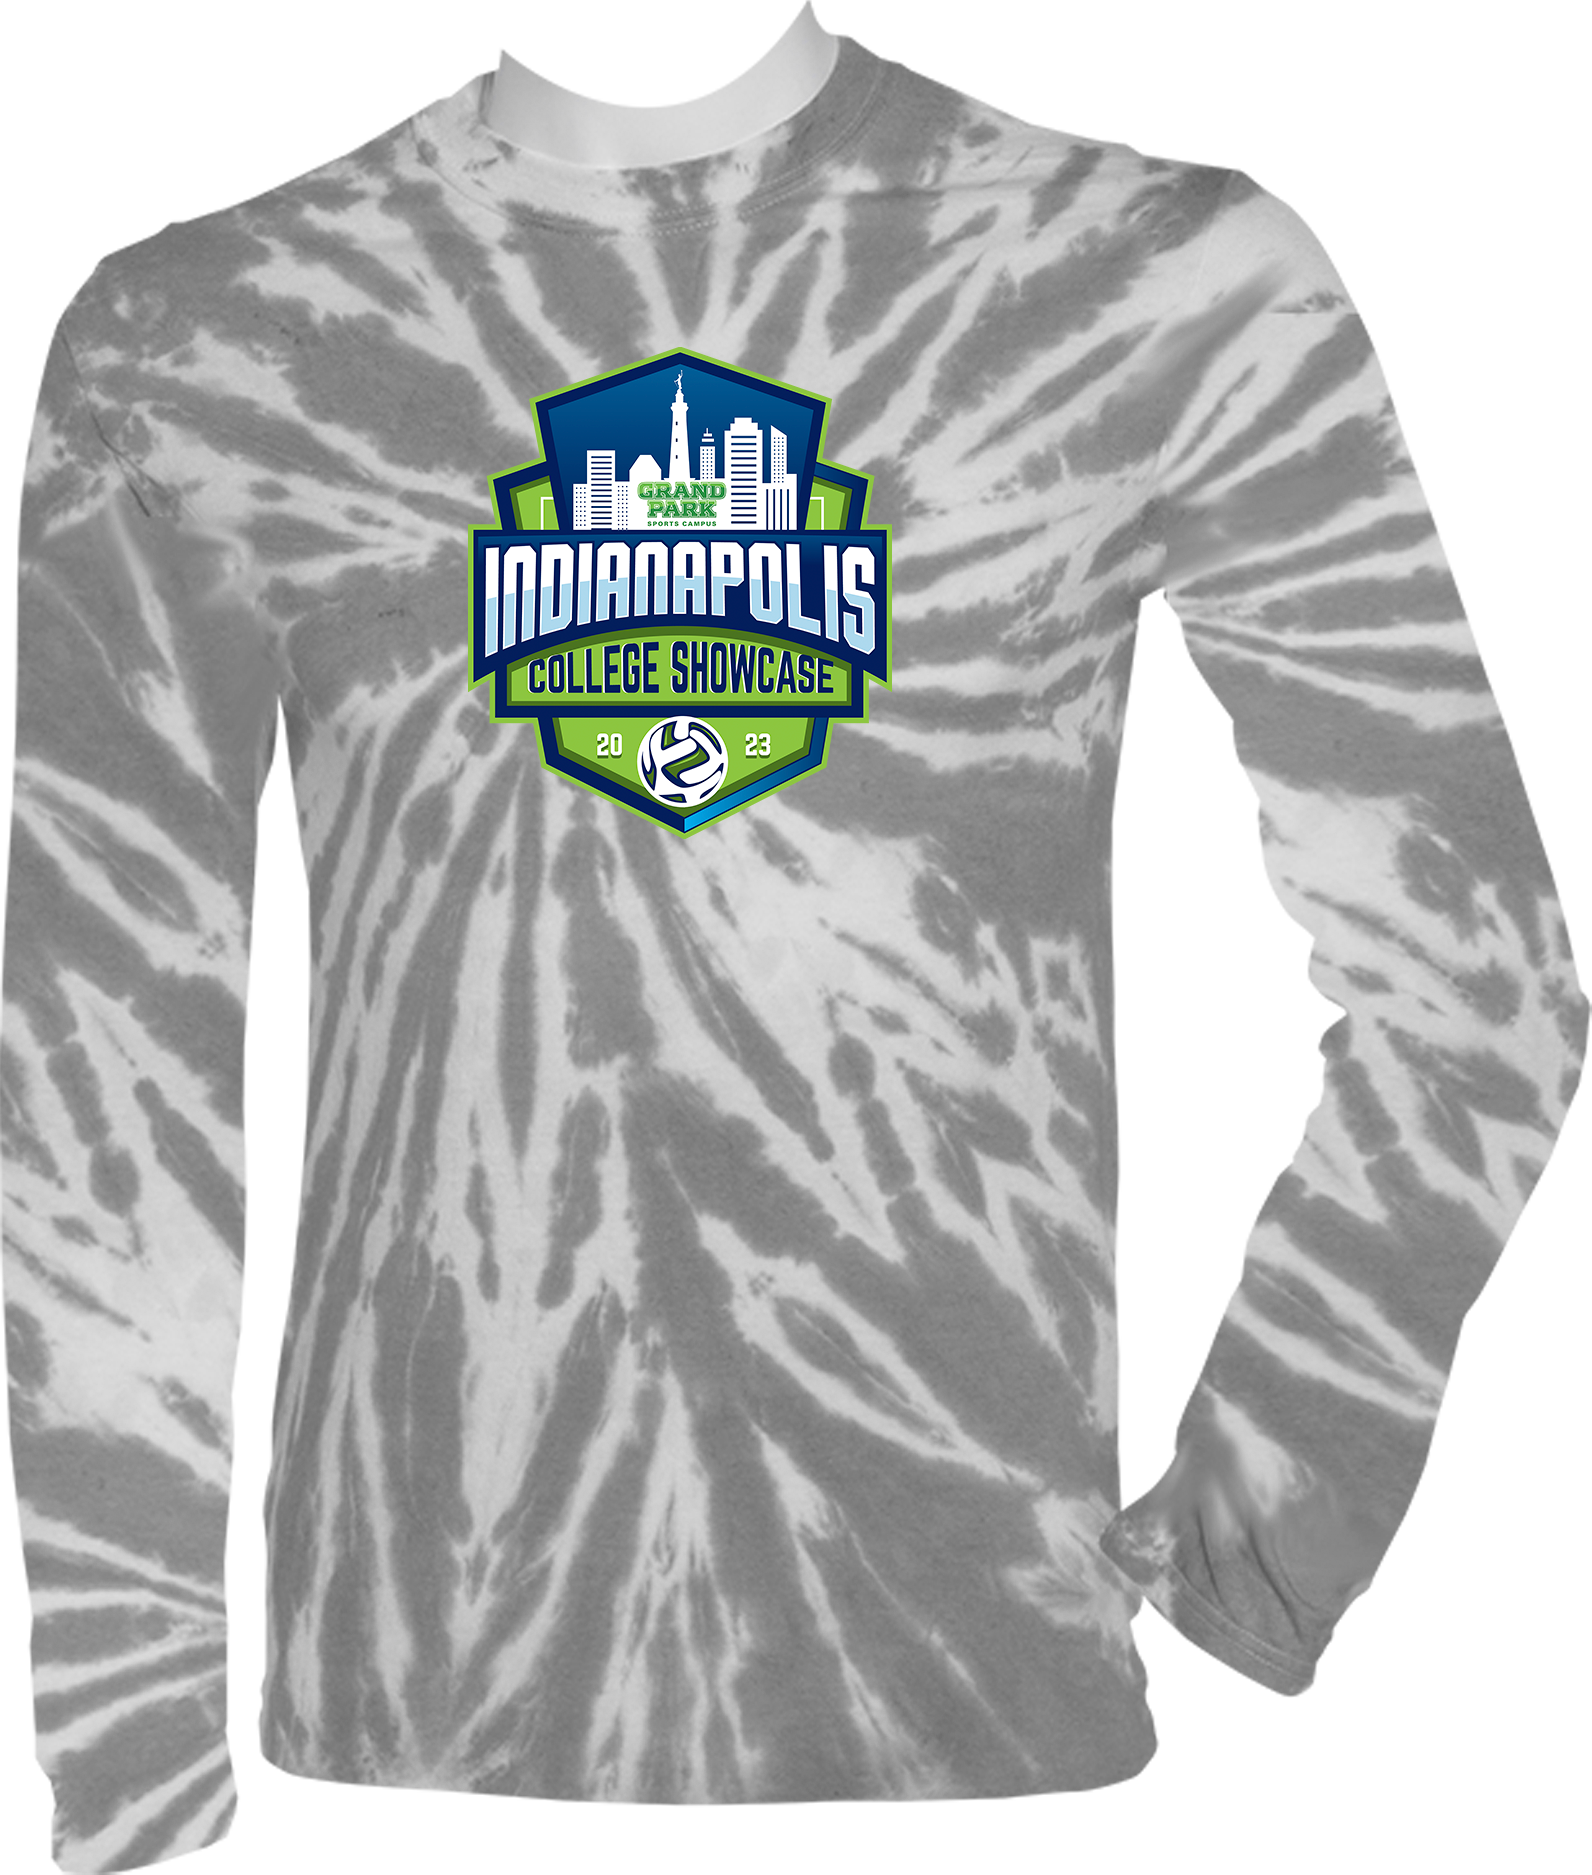 TIE-DYE LONG SLEEVES - 2023 Indianapolis College Showcase